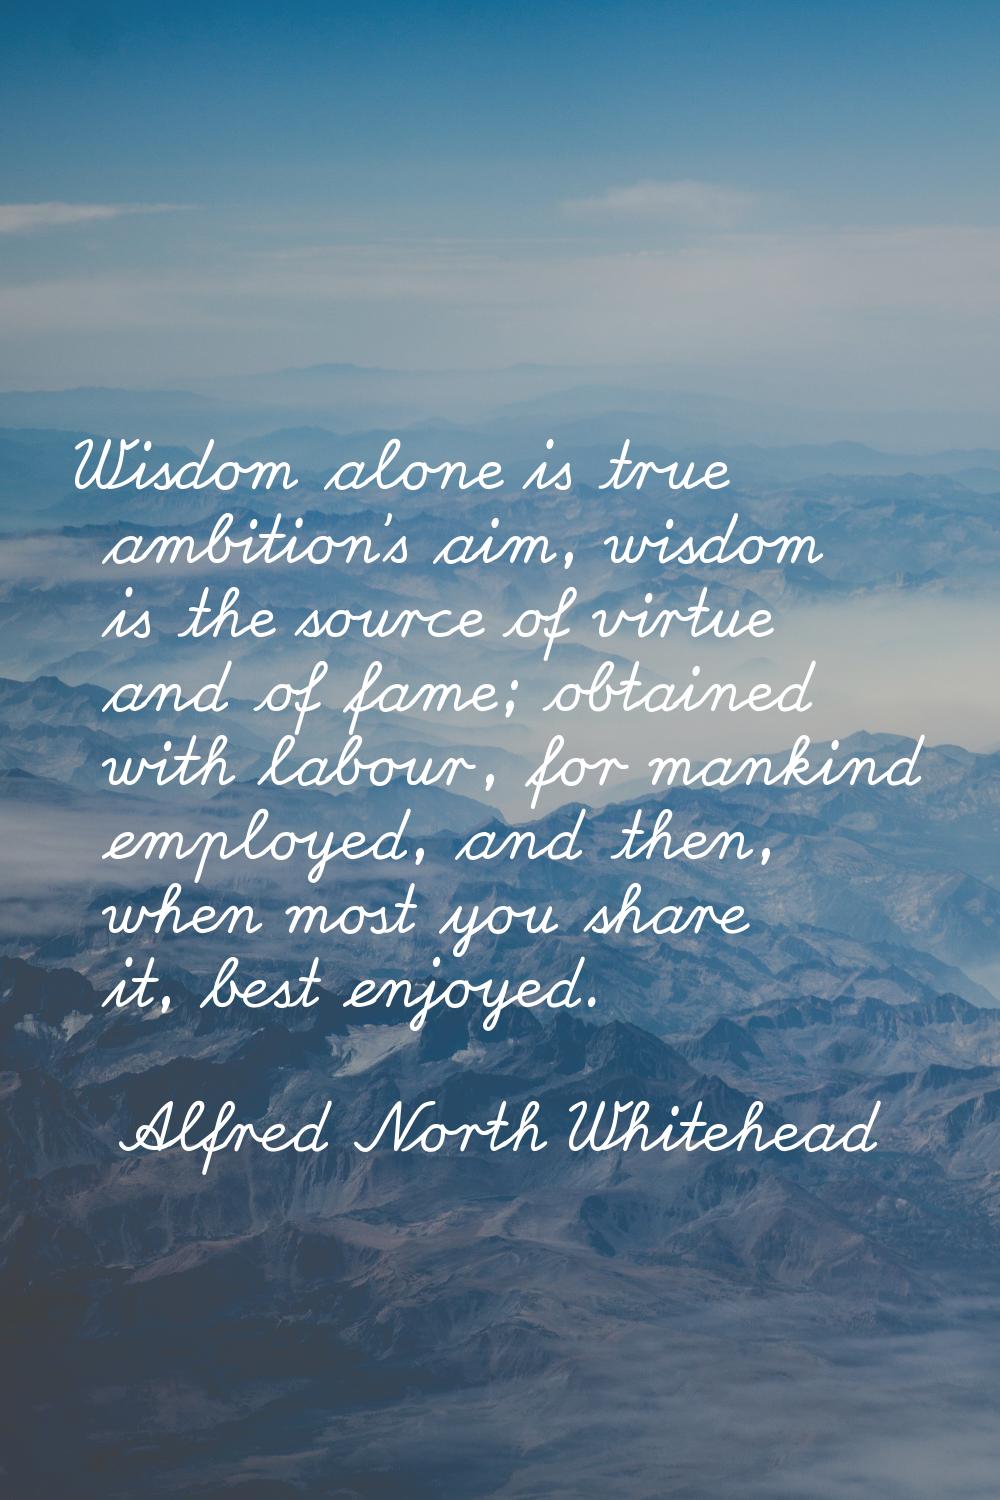 Wisdom alone is true ambition's aim, wisdom is the source of virtue and of fame; obtained with labo